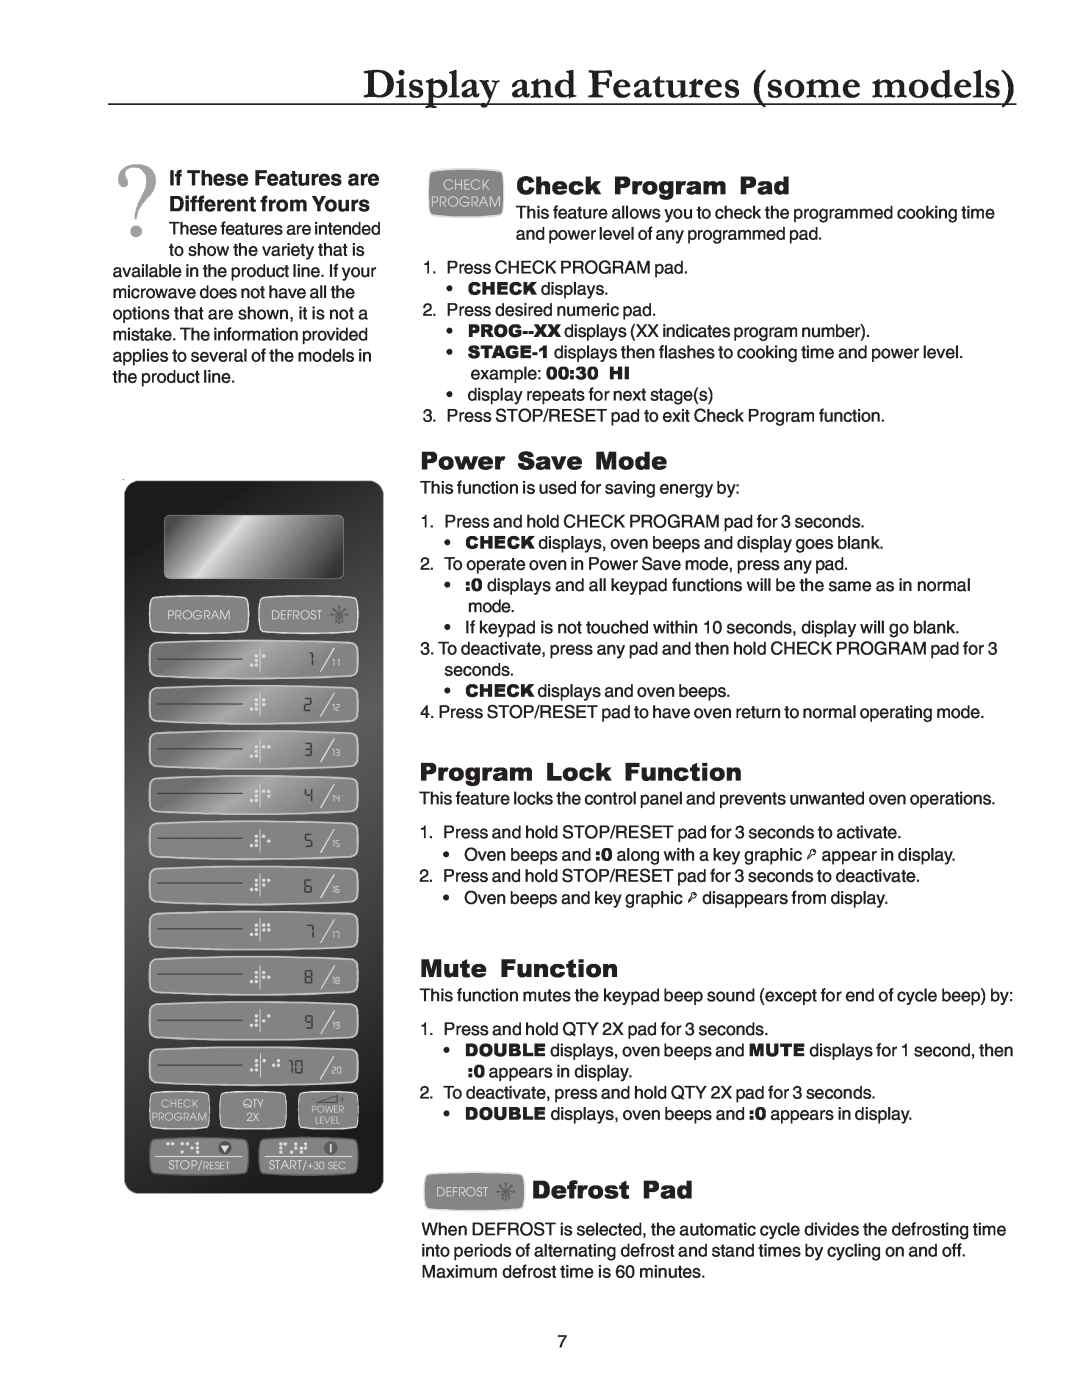 Amana Commercial Microwave Oven owner manual Check Program Pad, Power Save Mode, Program Lock Function, Mute Function 